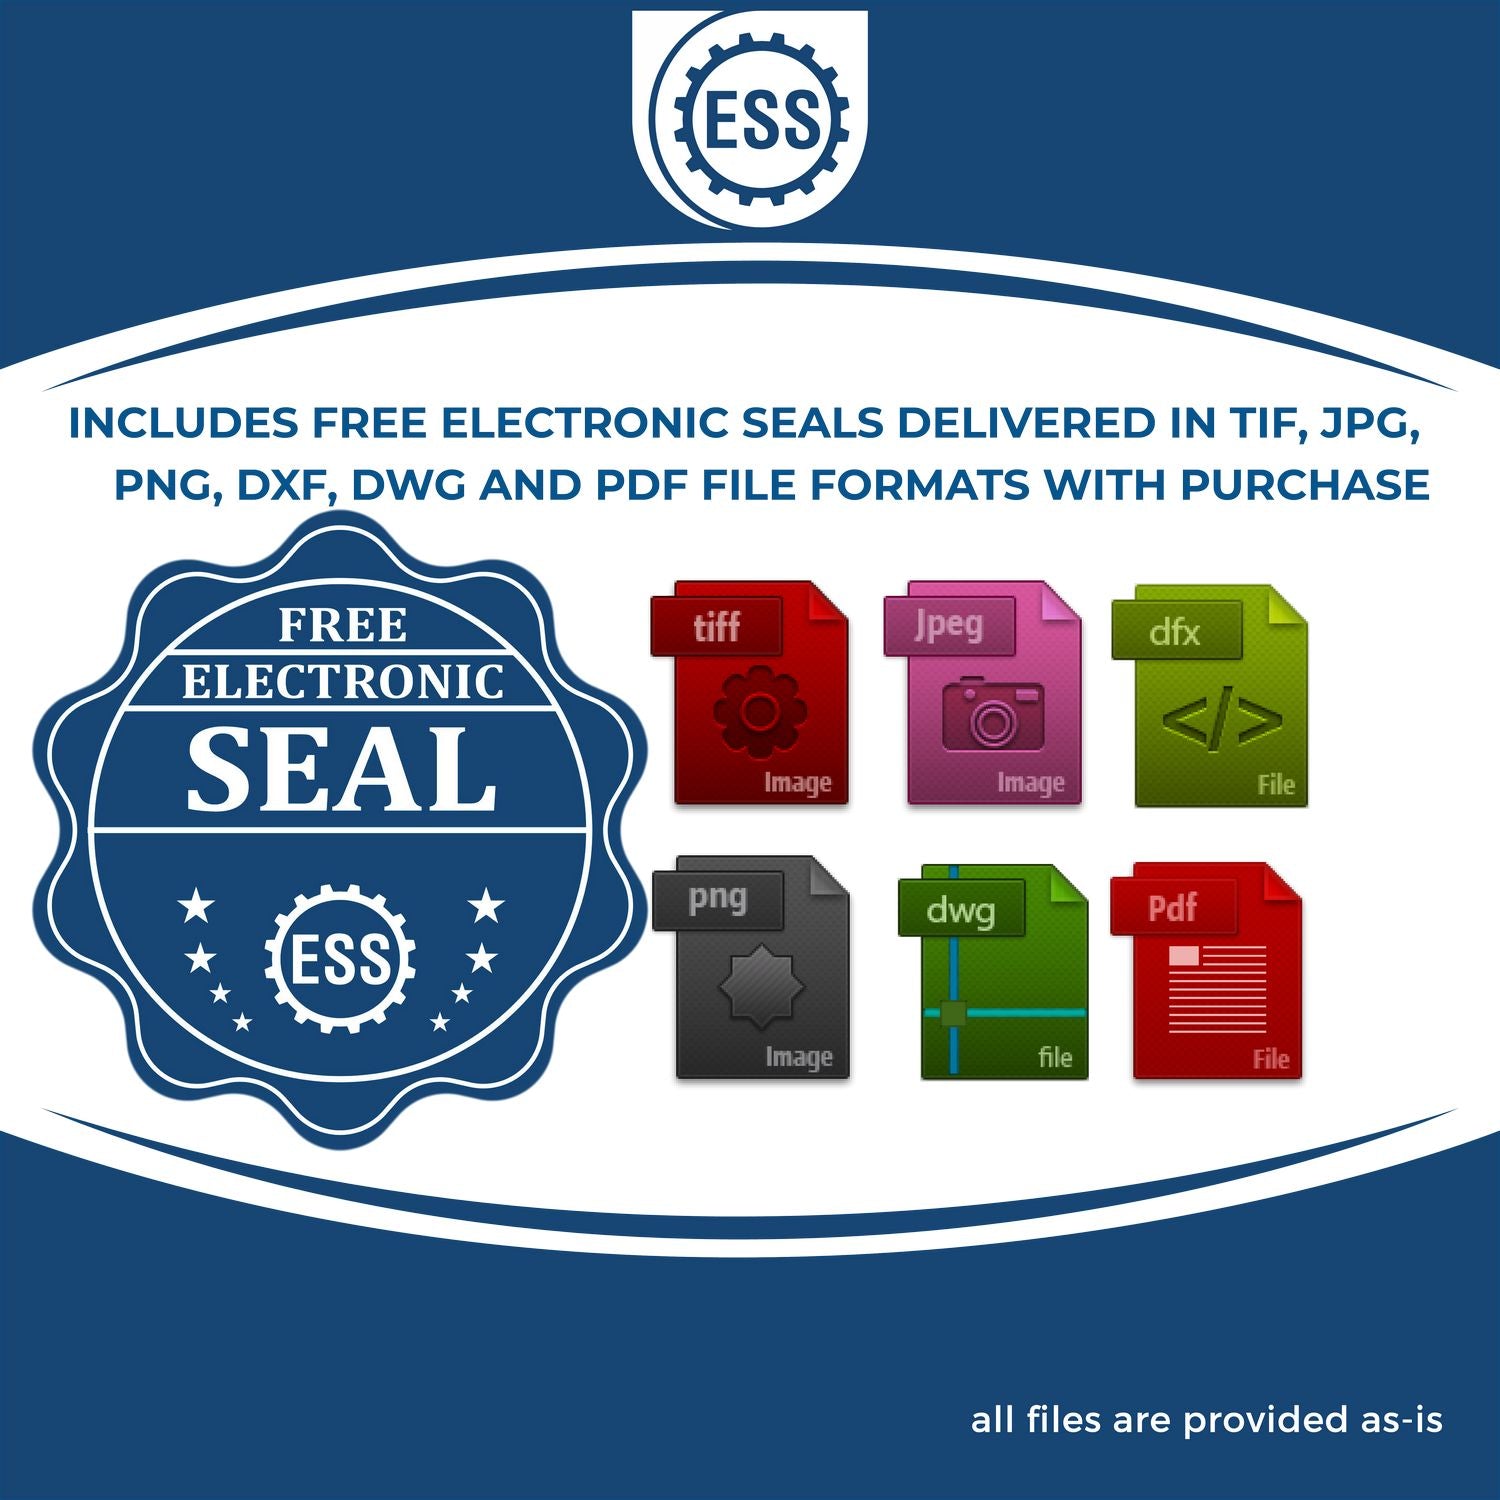 An infographic for the free electronic seal for the Self-Inking Indiana PE Stamp illustrating the different file type icons such as DXF, DWG, TIF, JPG and PNG.